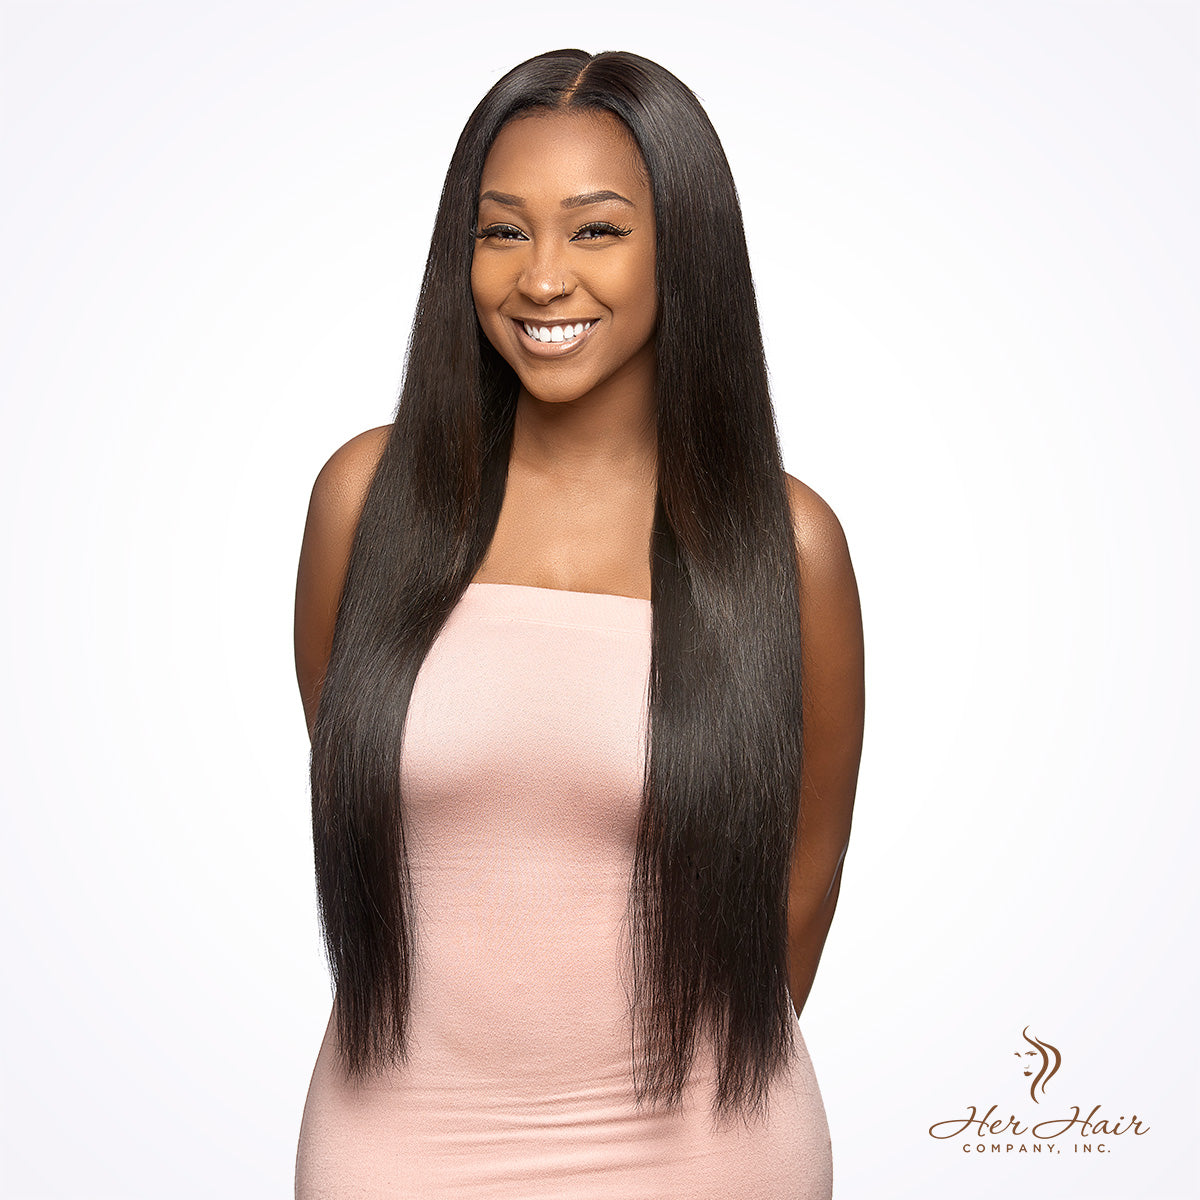 Some Important Hair Extension Care Tips for African-American Women